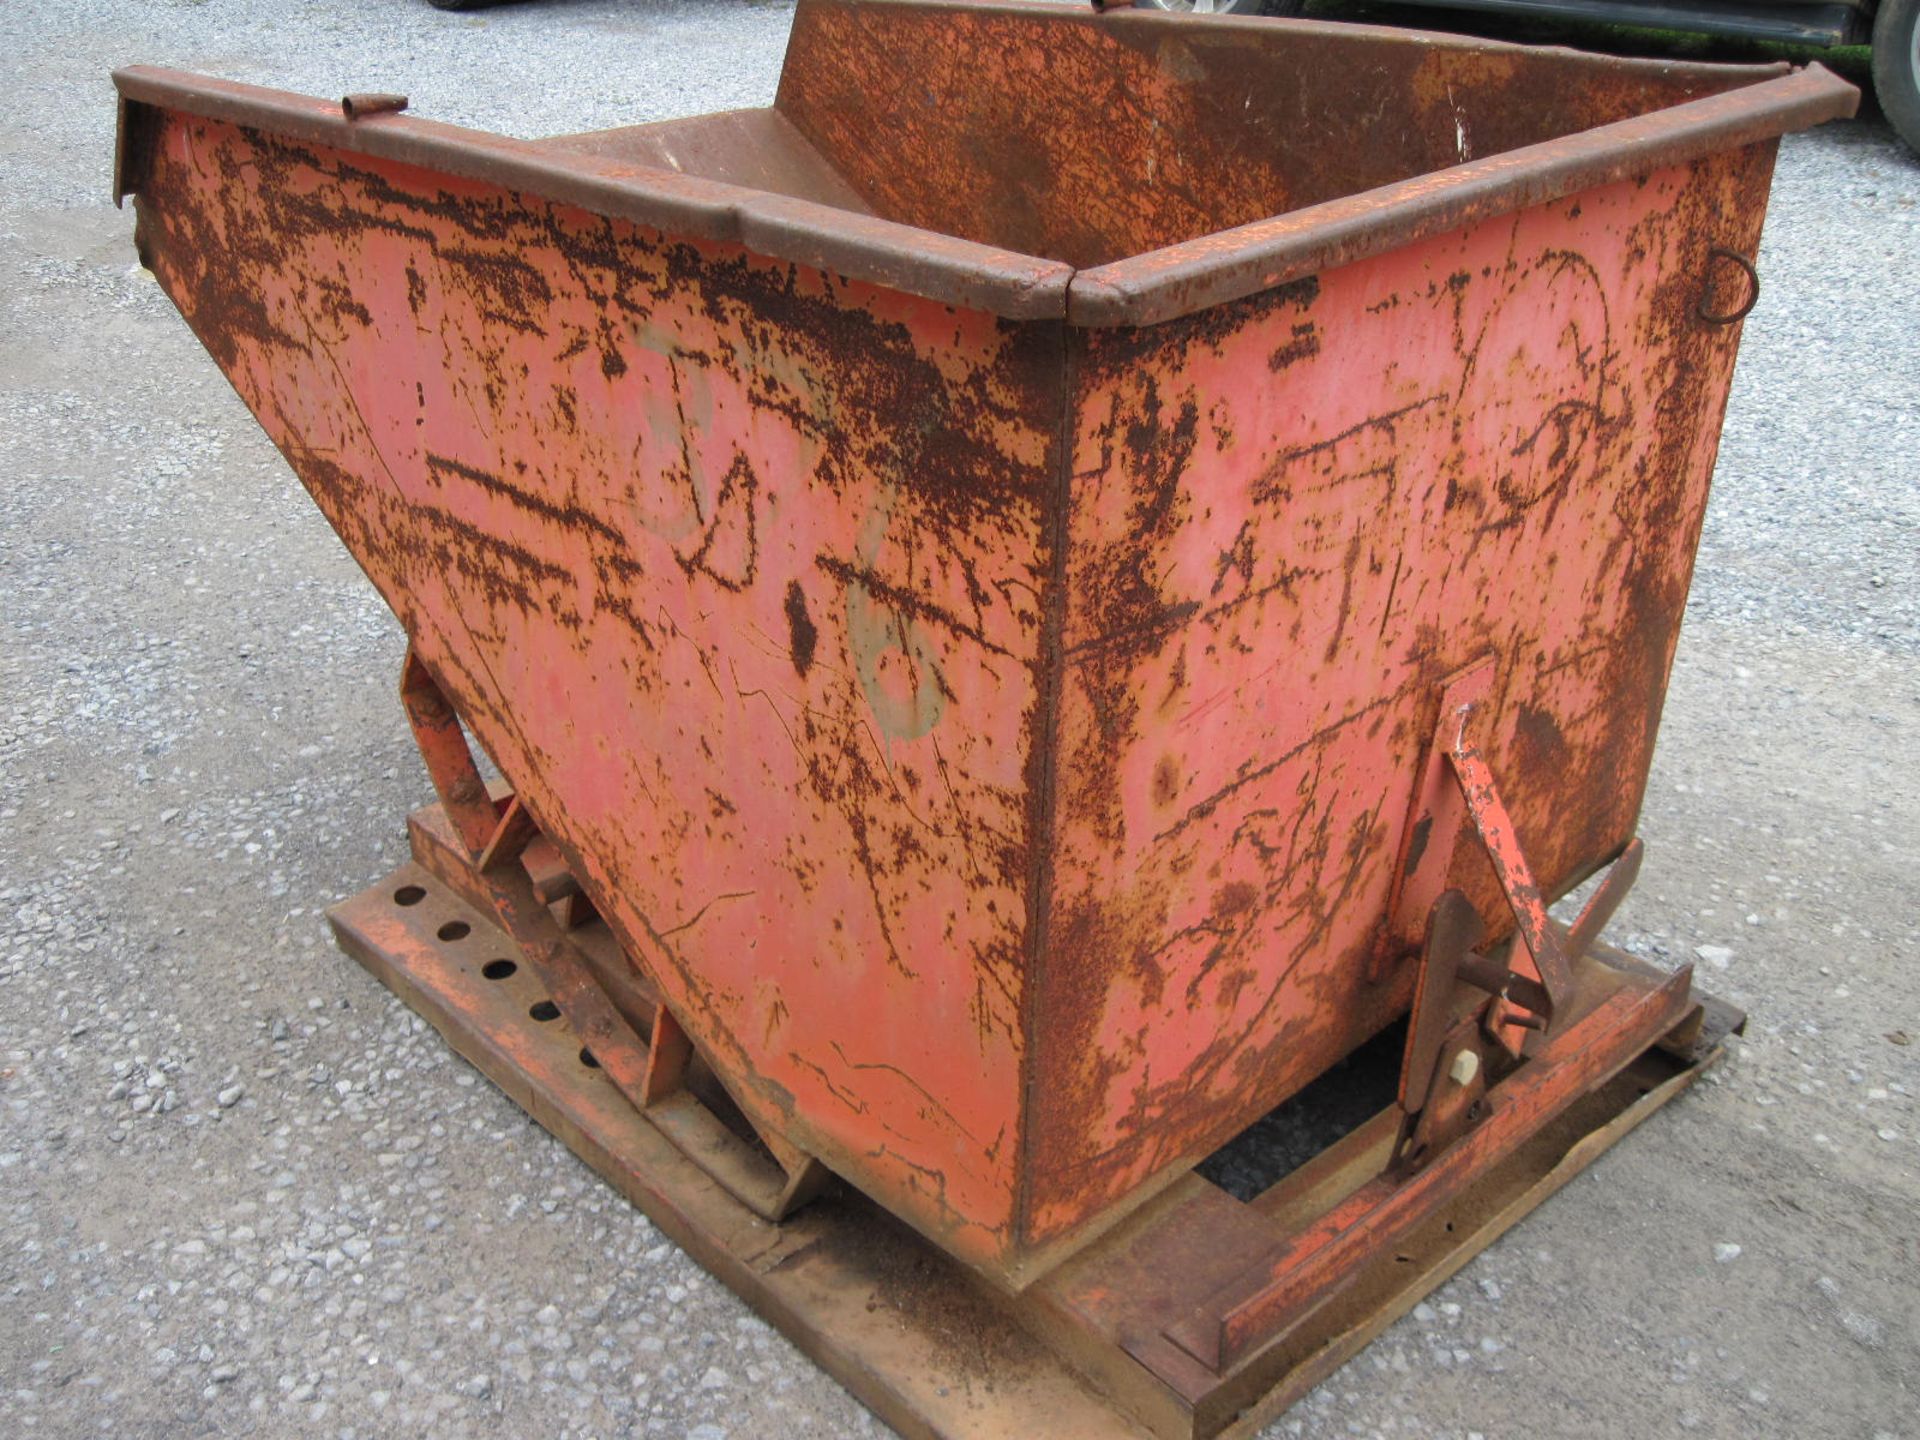 Self Dumping Hopper Attachment for Forklift, 1/2 Yard Capacity - Image 2 of 3